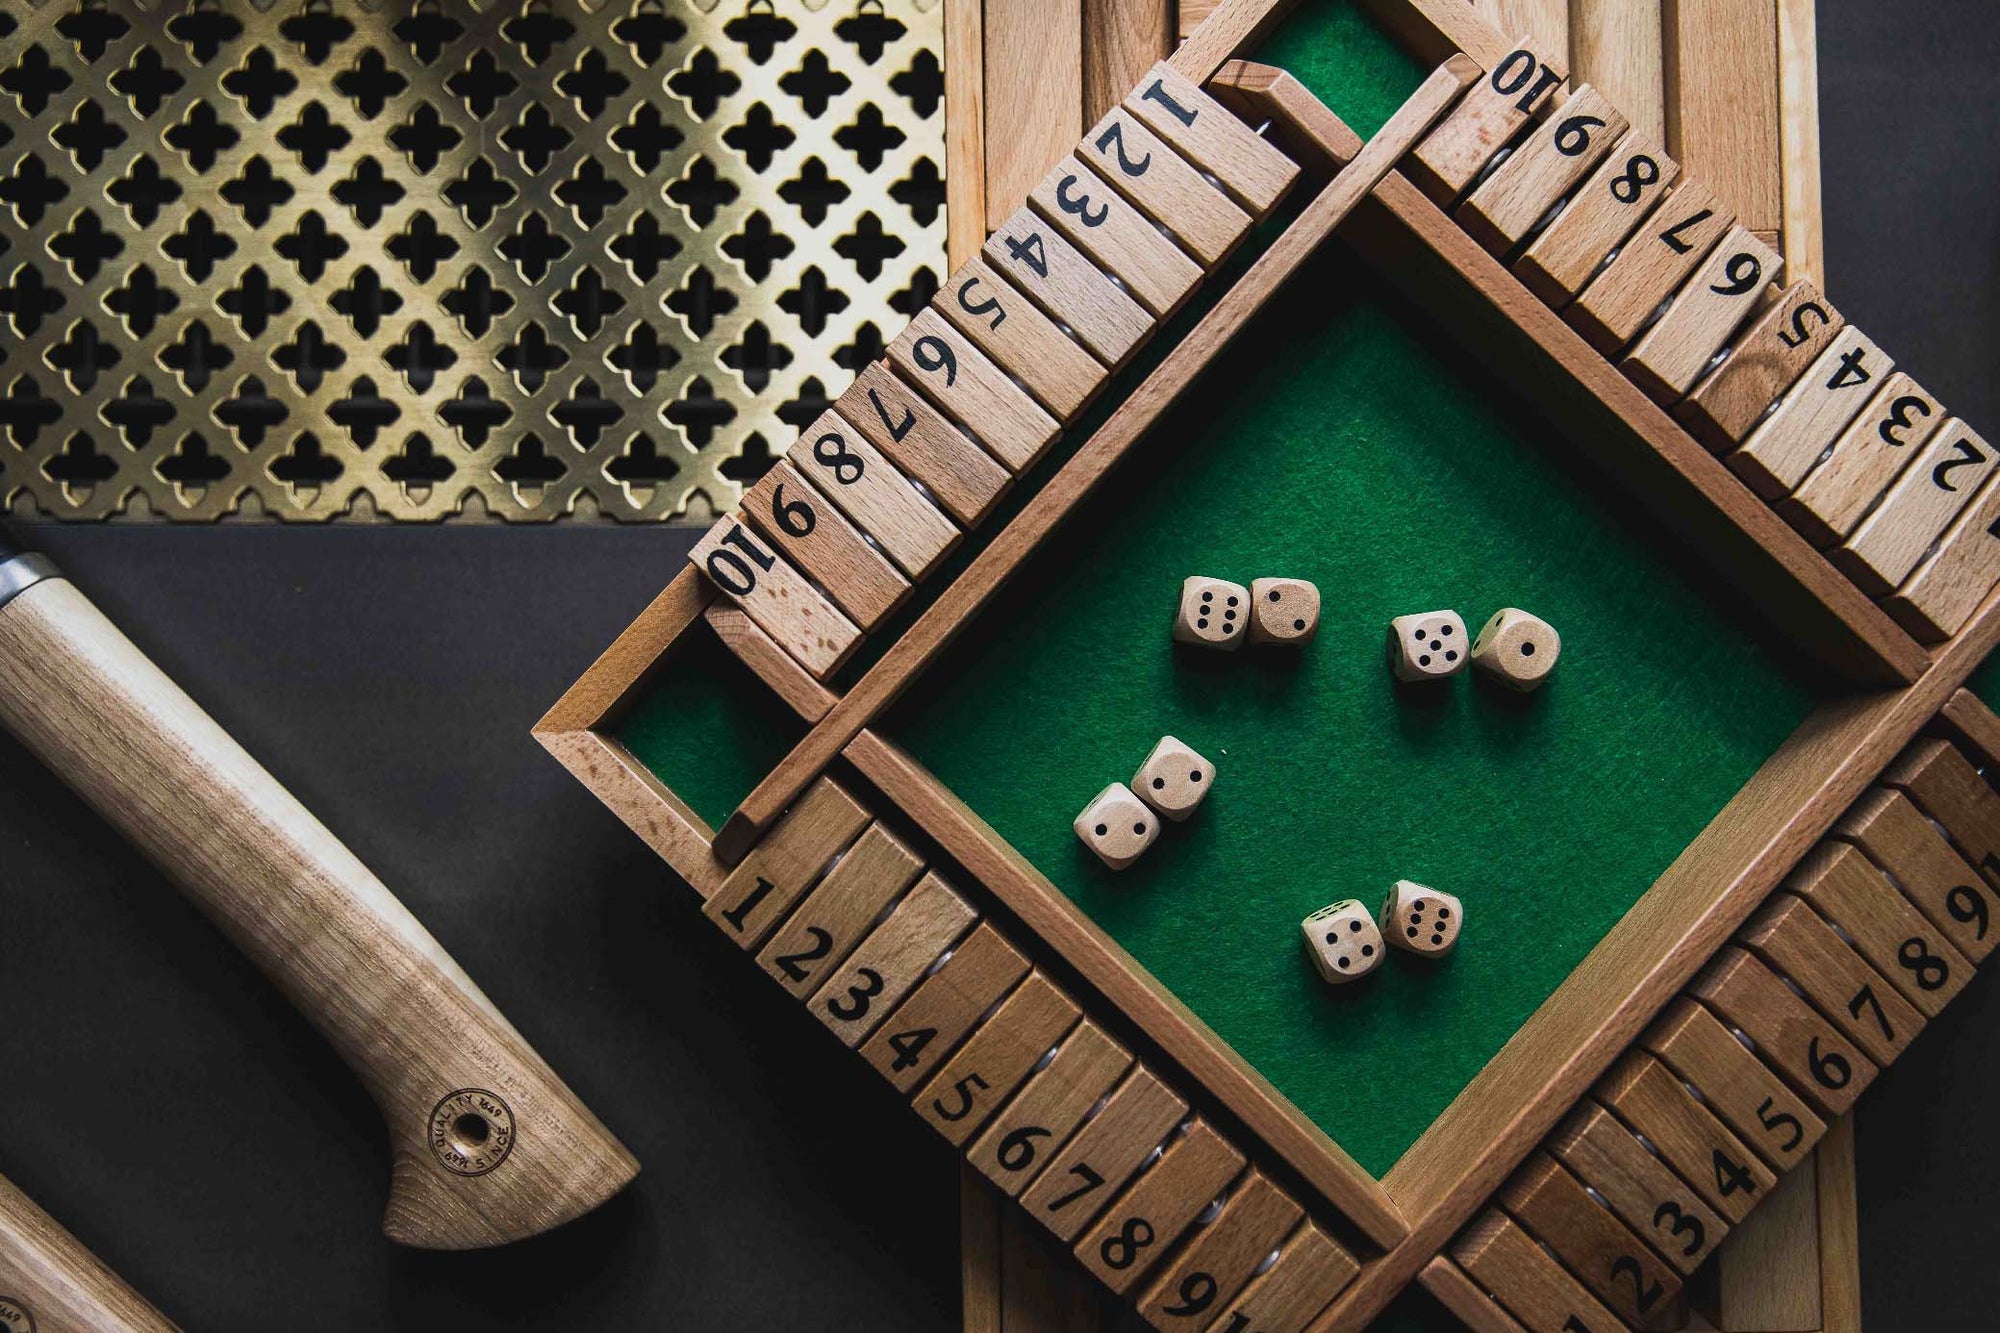 Traditional board games for the entire family - these classics also crown the interior